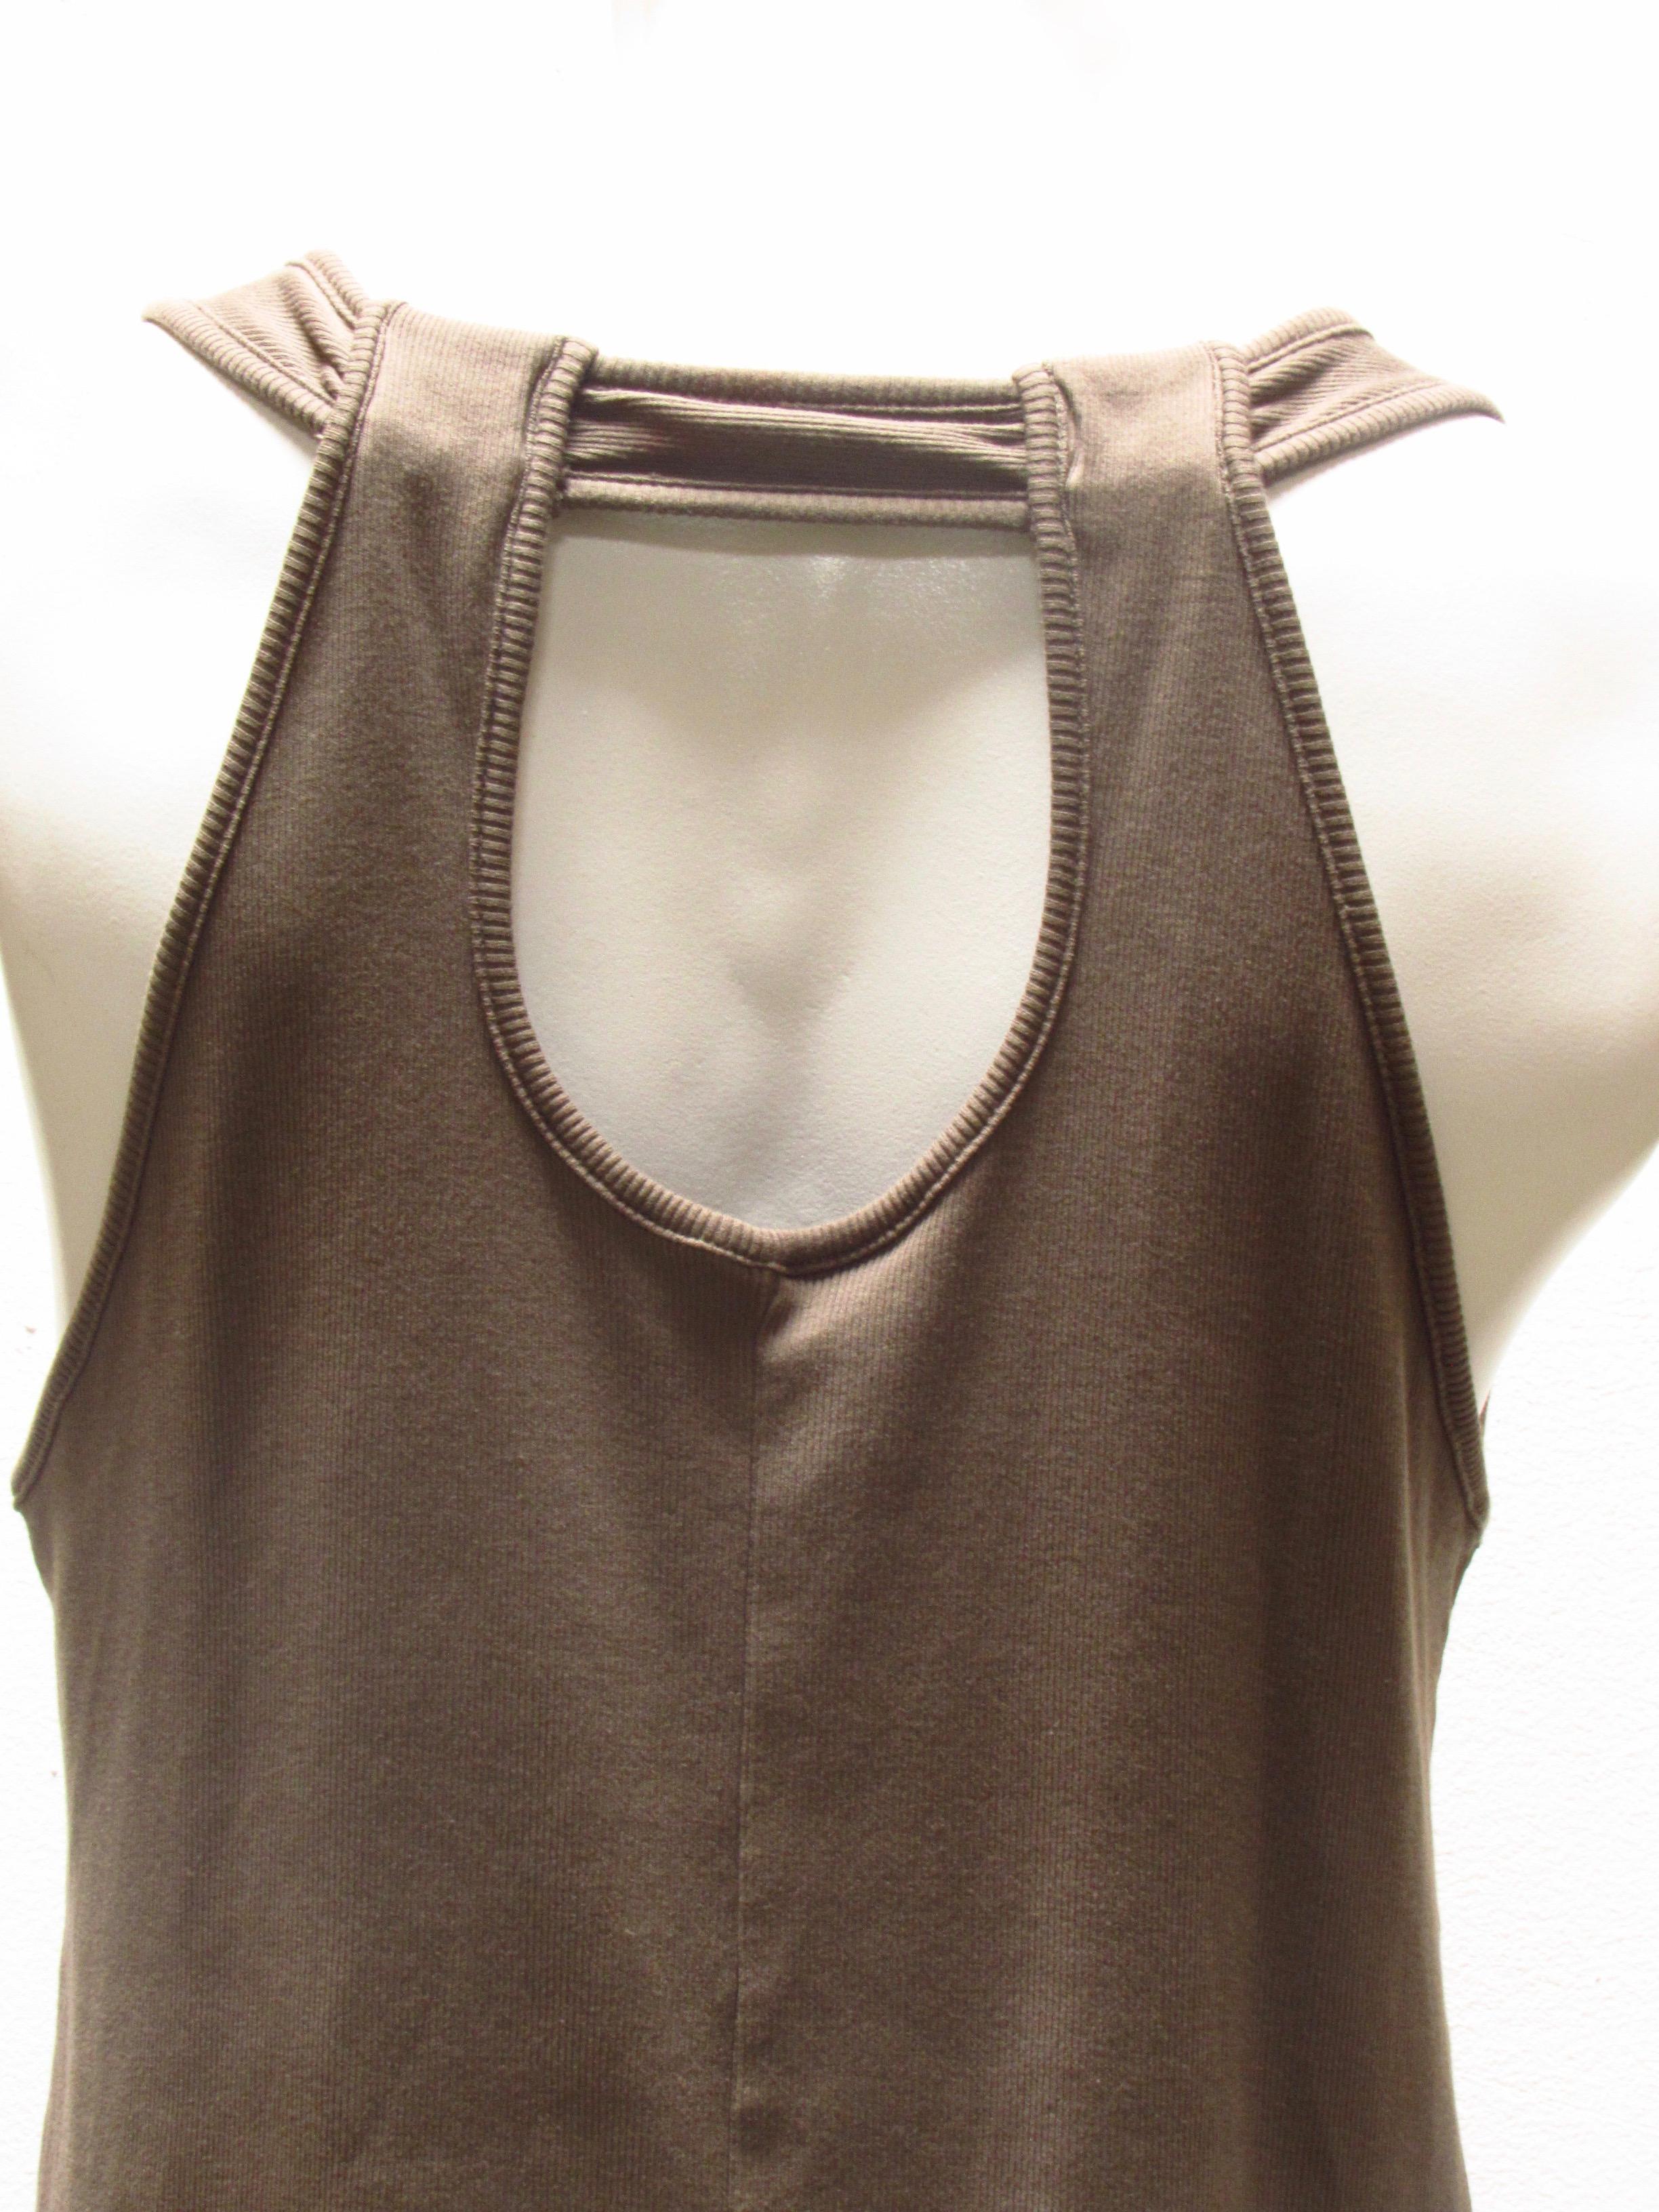 Undercover Scoop Neck Tank Top In New Condition For Sale In Laguna Beach, CA